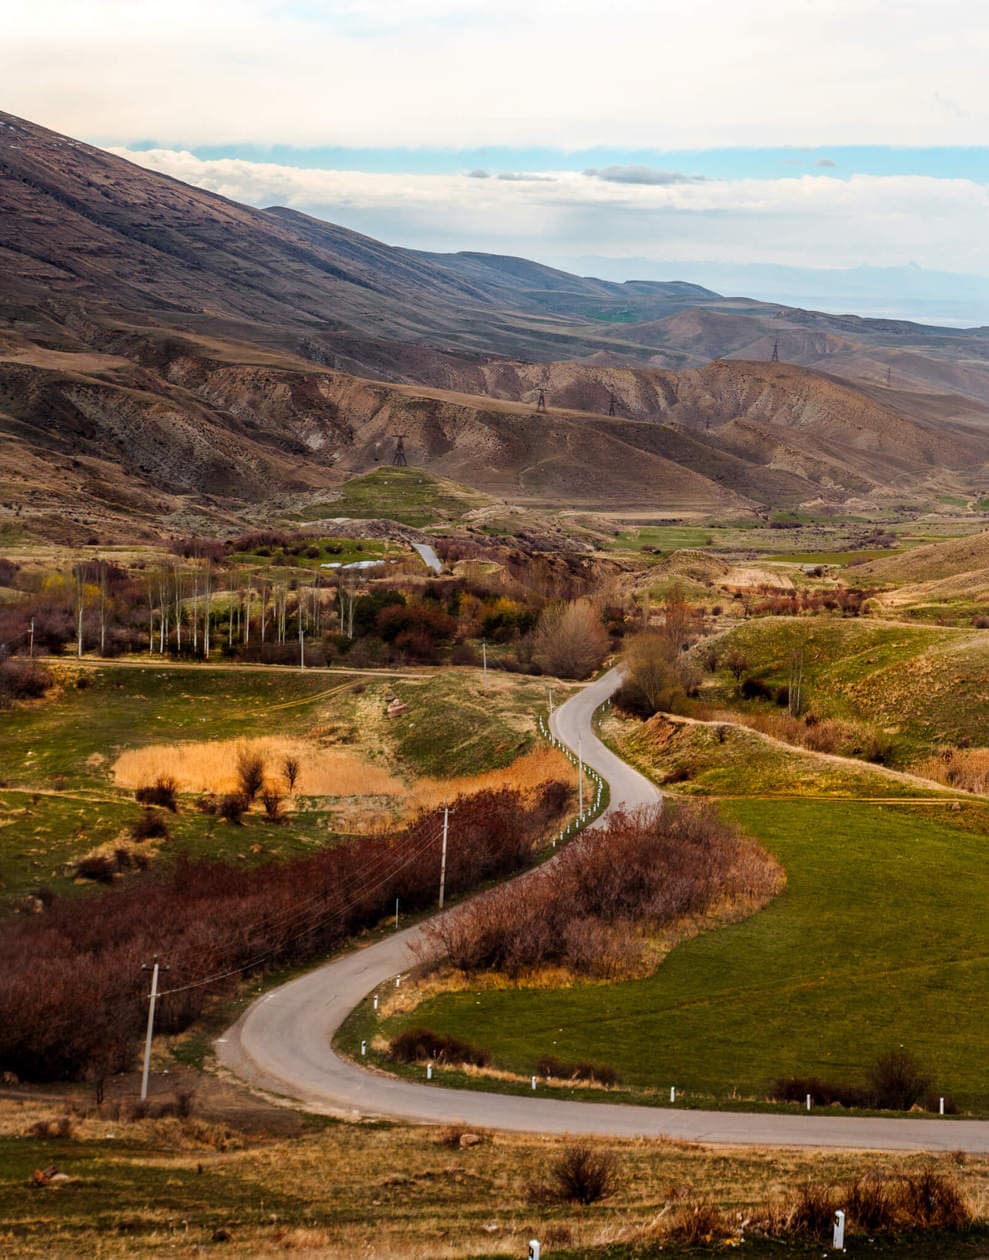 Renting a car is one of the best ways to explore the Armenian countryside. Keep reading for everything you need to know before renting a car in Armenia, including Yerevan driving tips, road conditions, and what to expect if you get pulled over.